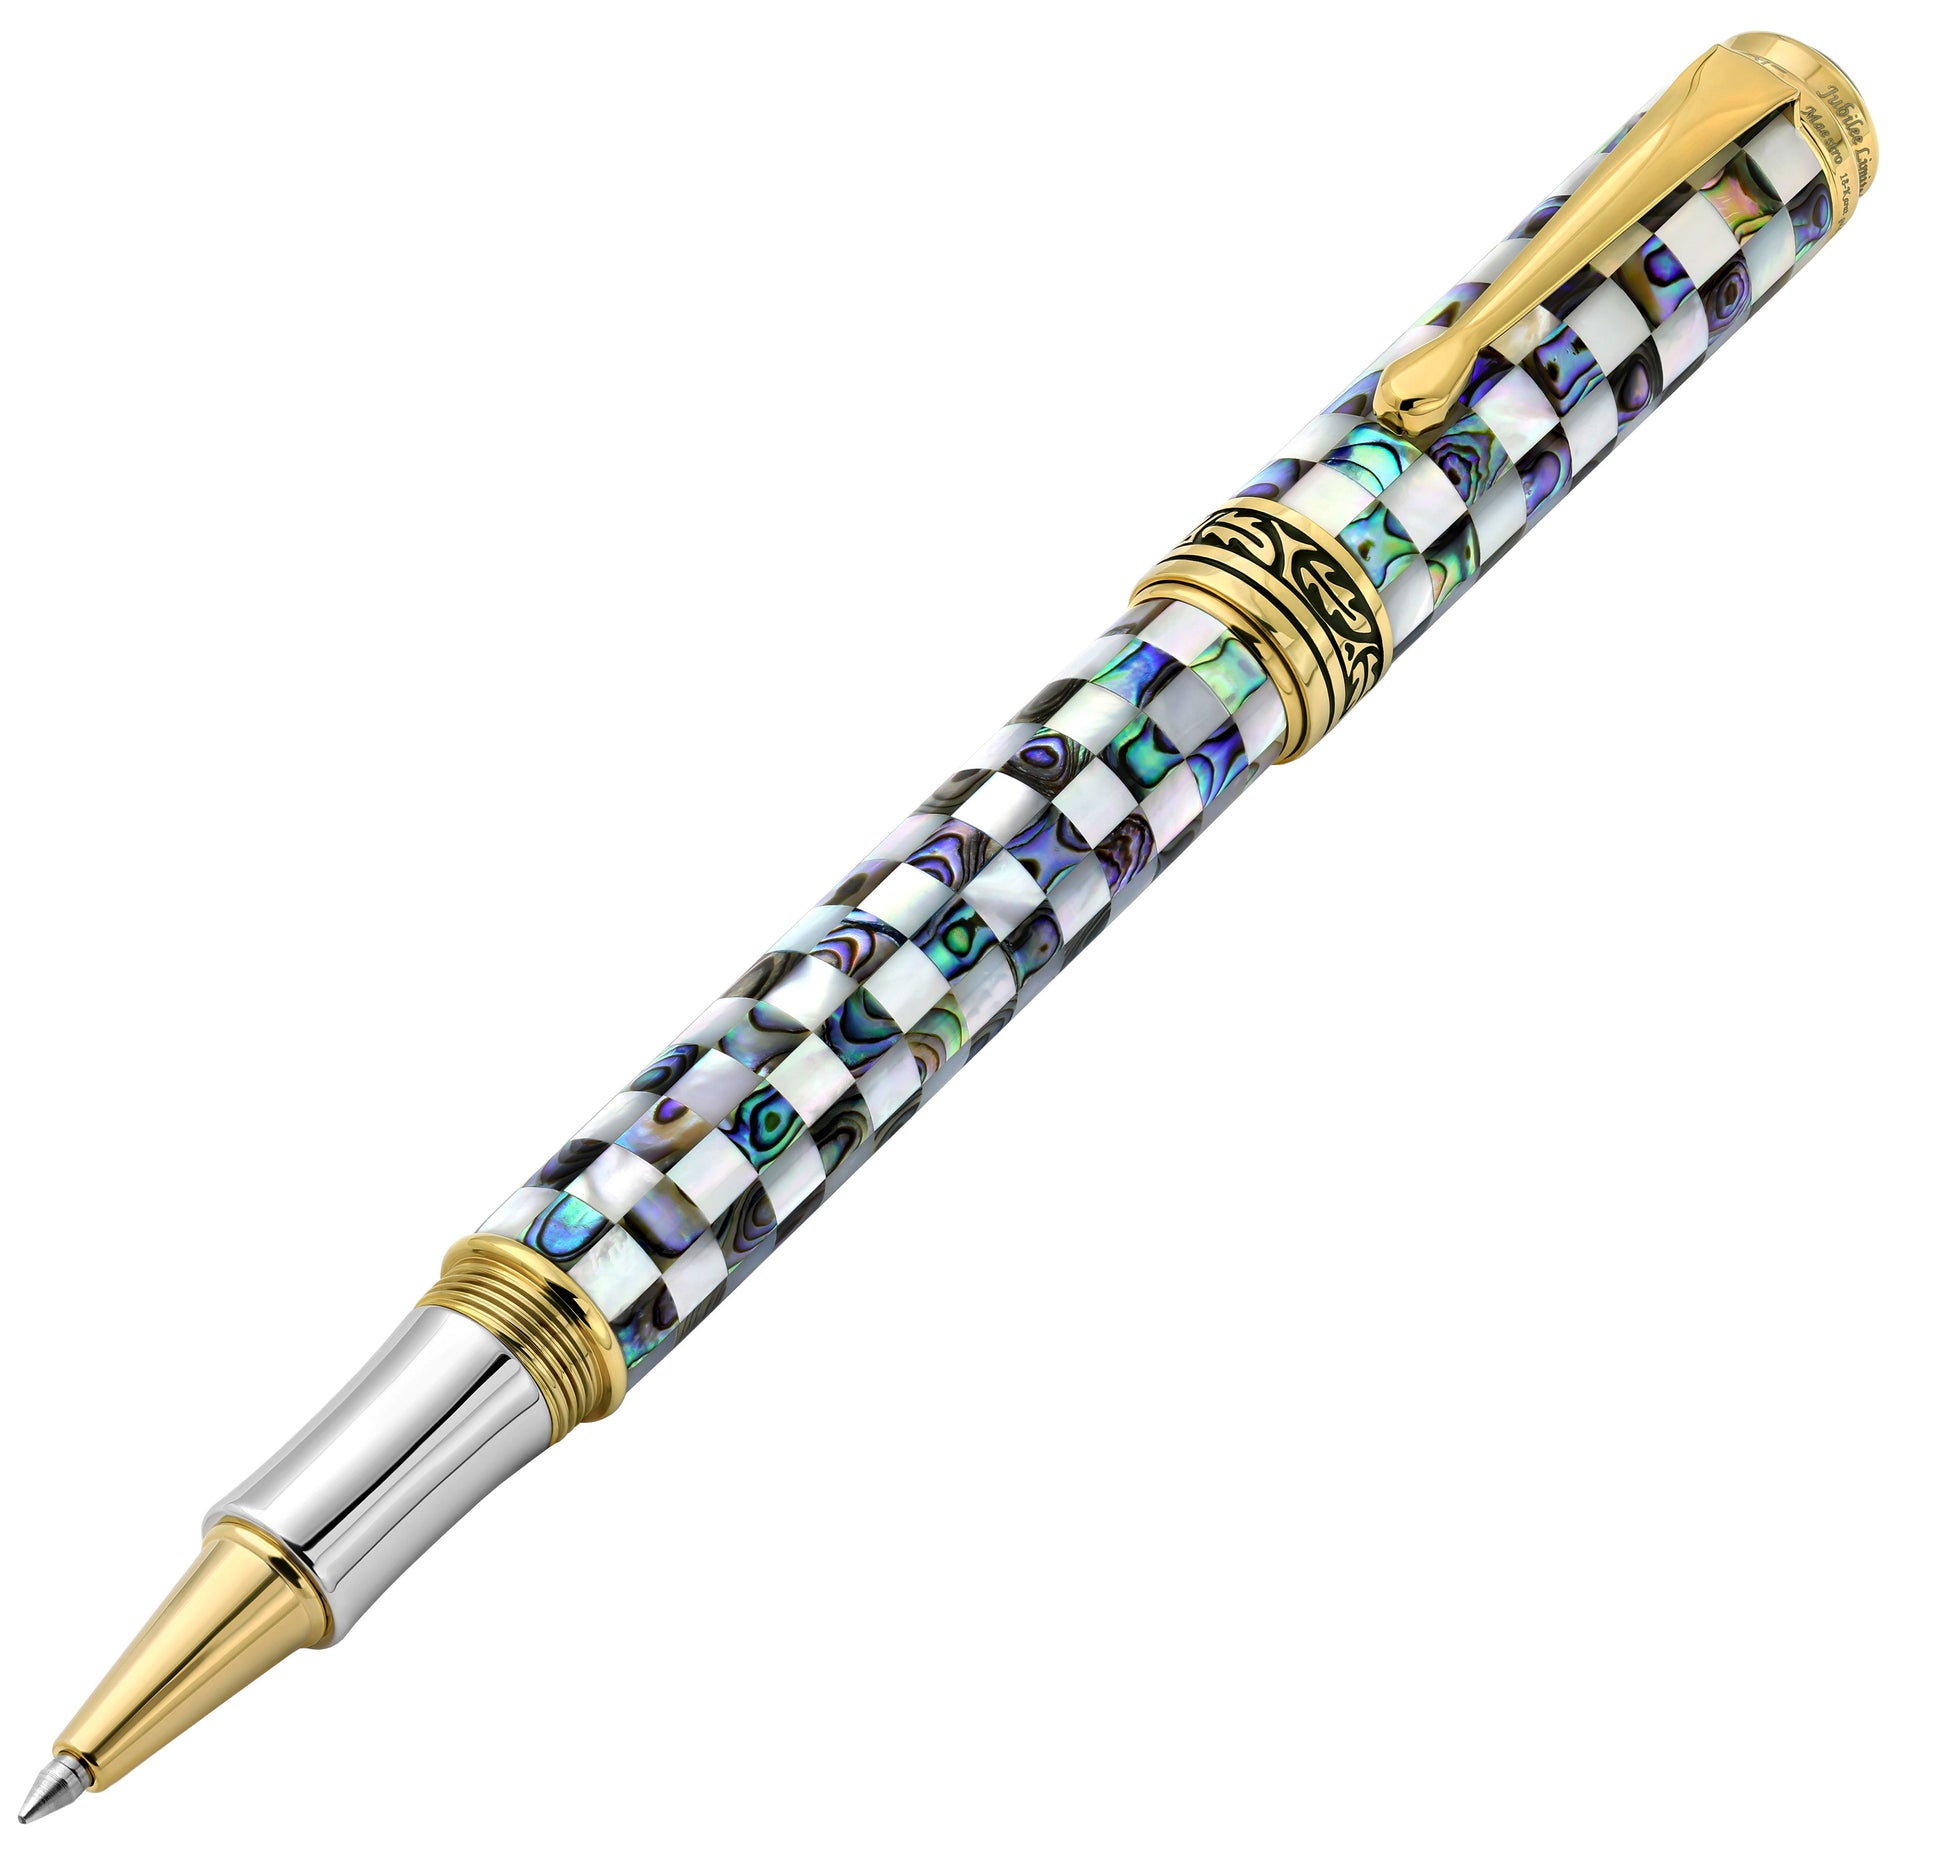 Maestro Jubilee Gold Rollerball Pen uncapped at an angle